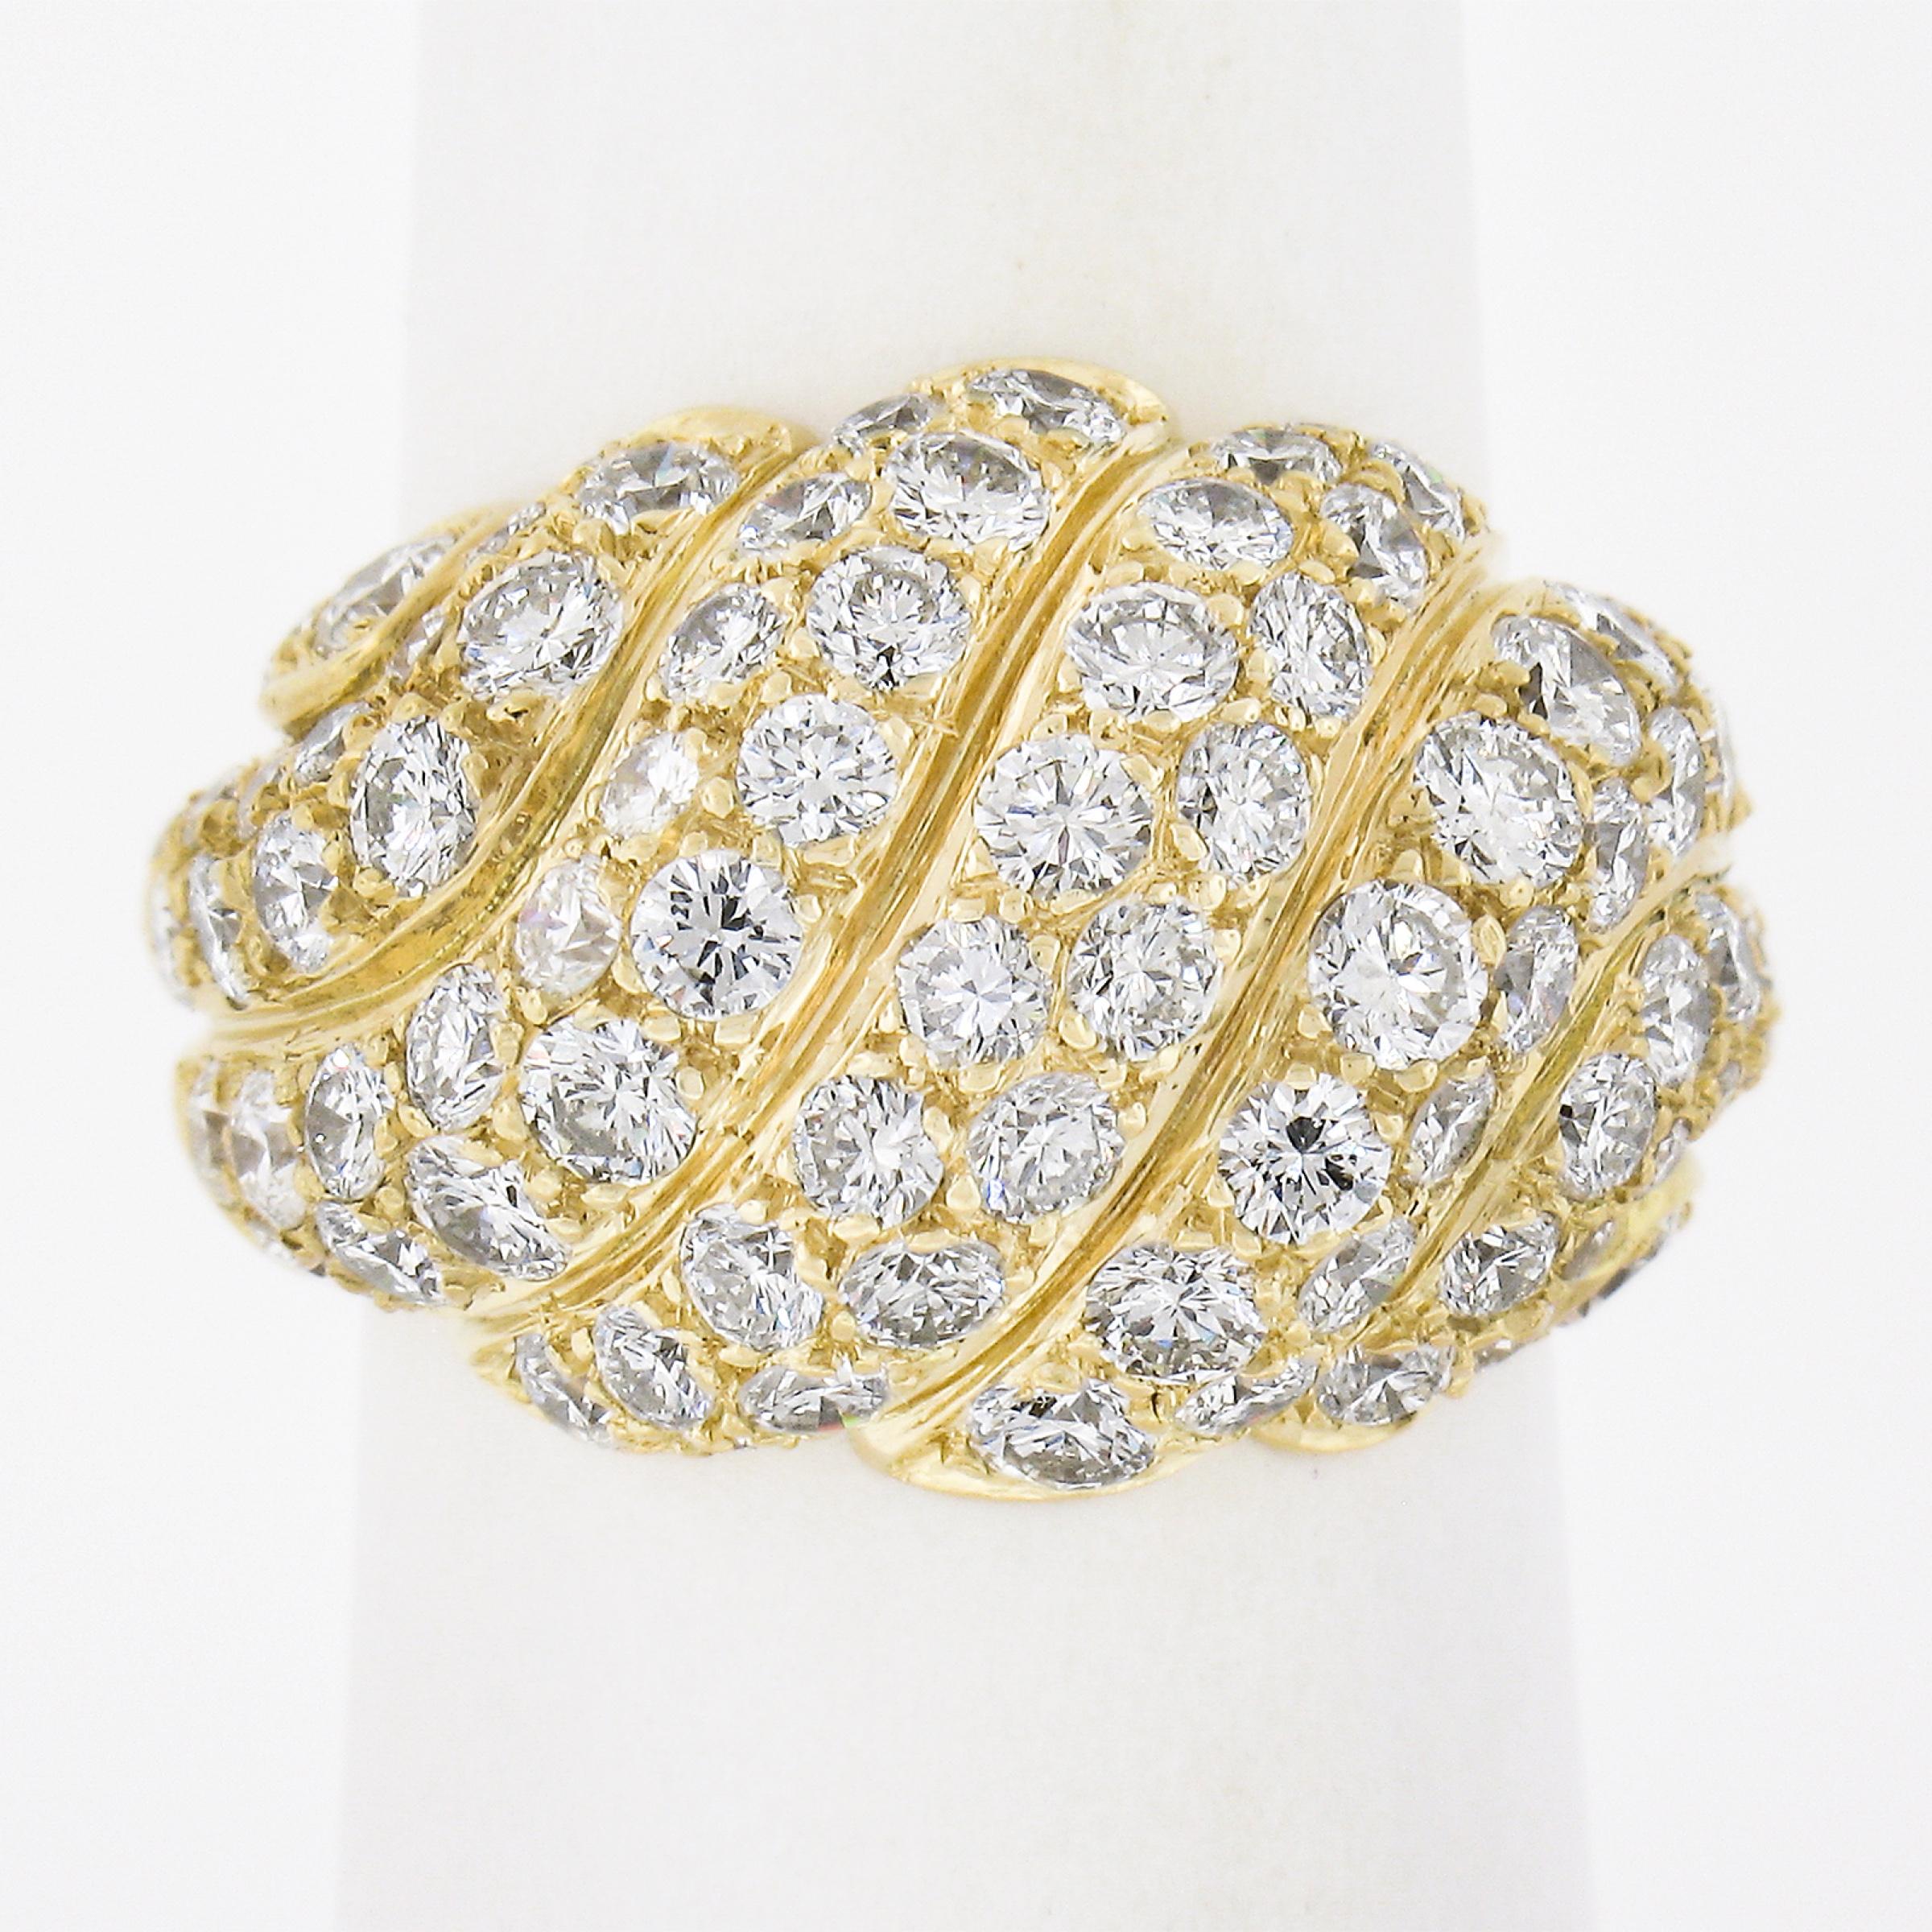 The French are truly perfectionists - This ring is no different. It is perfect! Perfect materials - solid luscious 18k yellow gold, colorless loupe clean ideal curt diamonds and magnificent design and workmanship to bring everything together! This